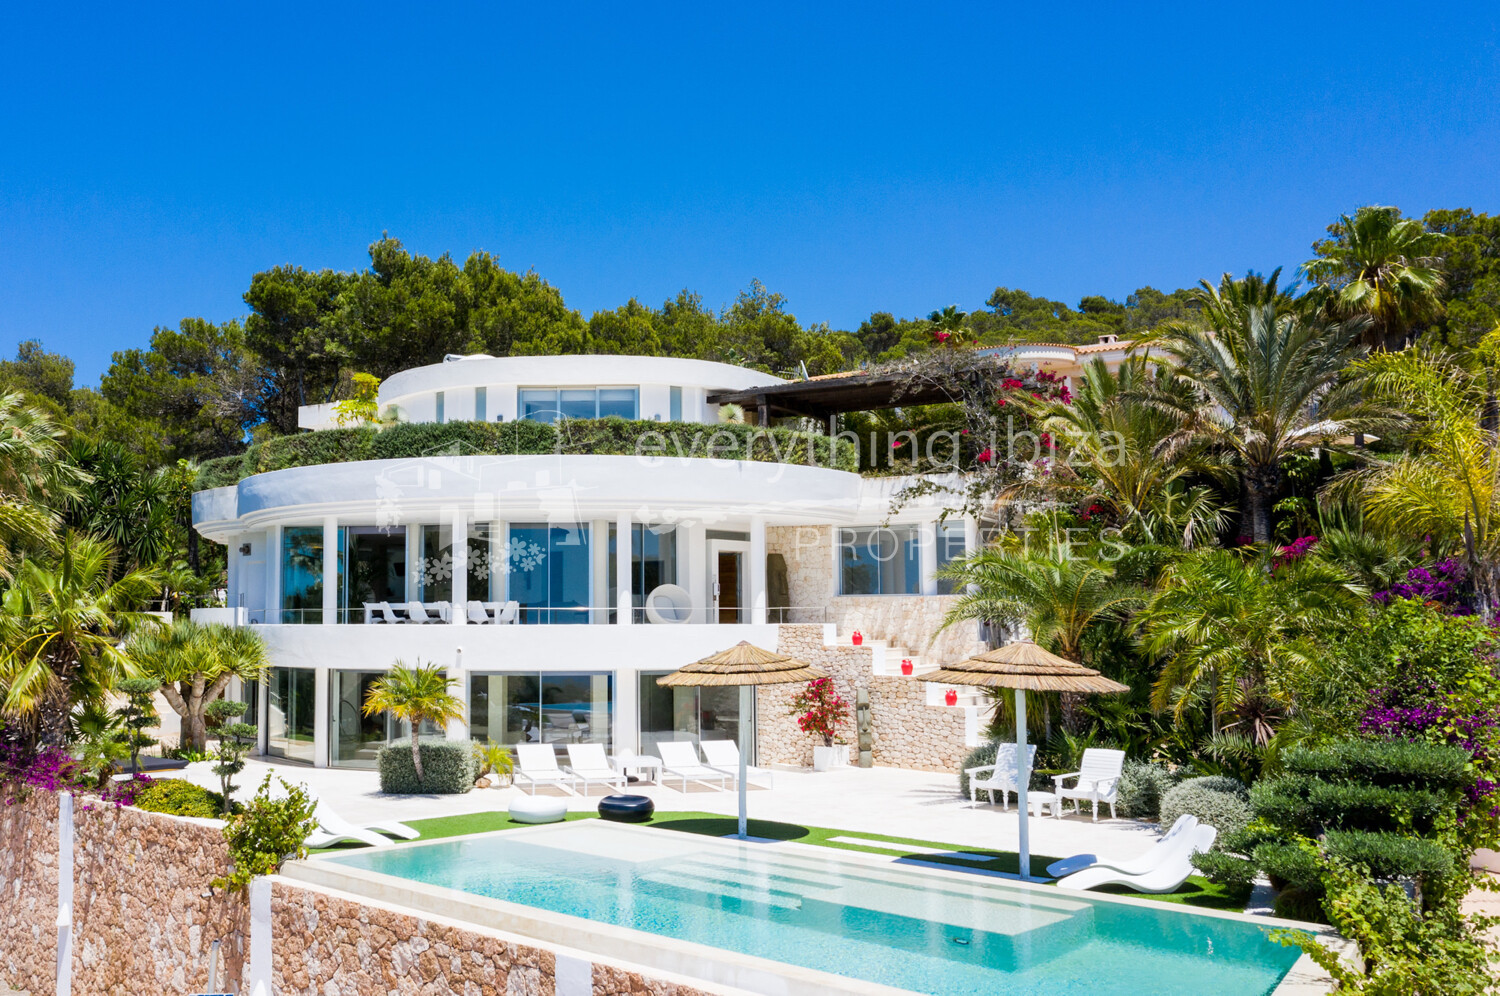 Luxurious Cosmopolitan Villa with Stunning Sea and Sunset Views, ref. 1609, for sale in Ibiza by everything ibiza Properties